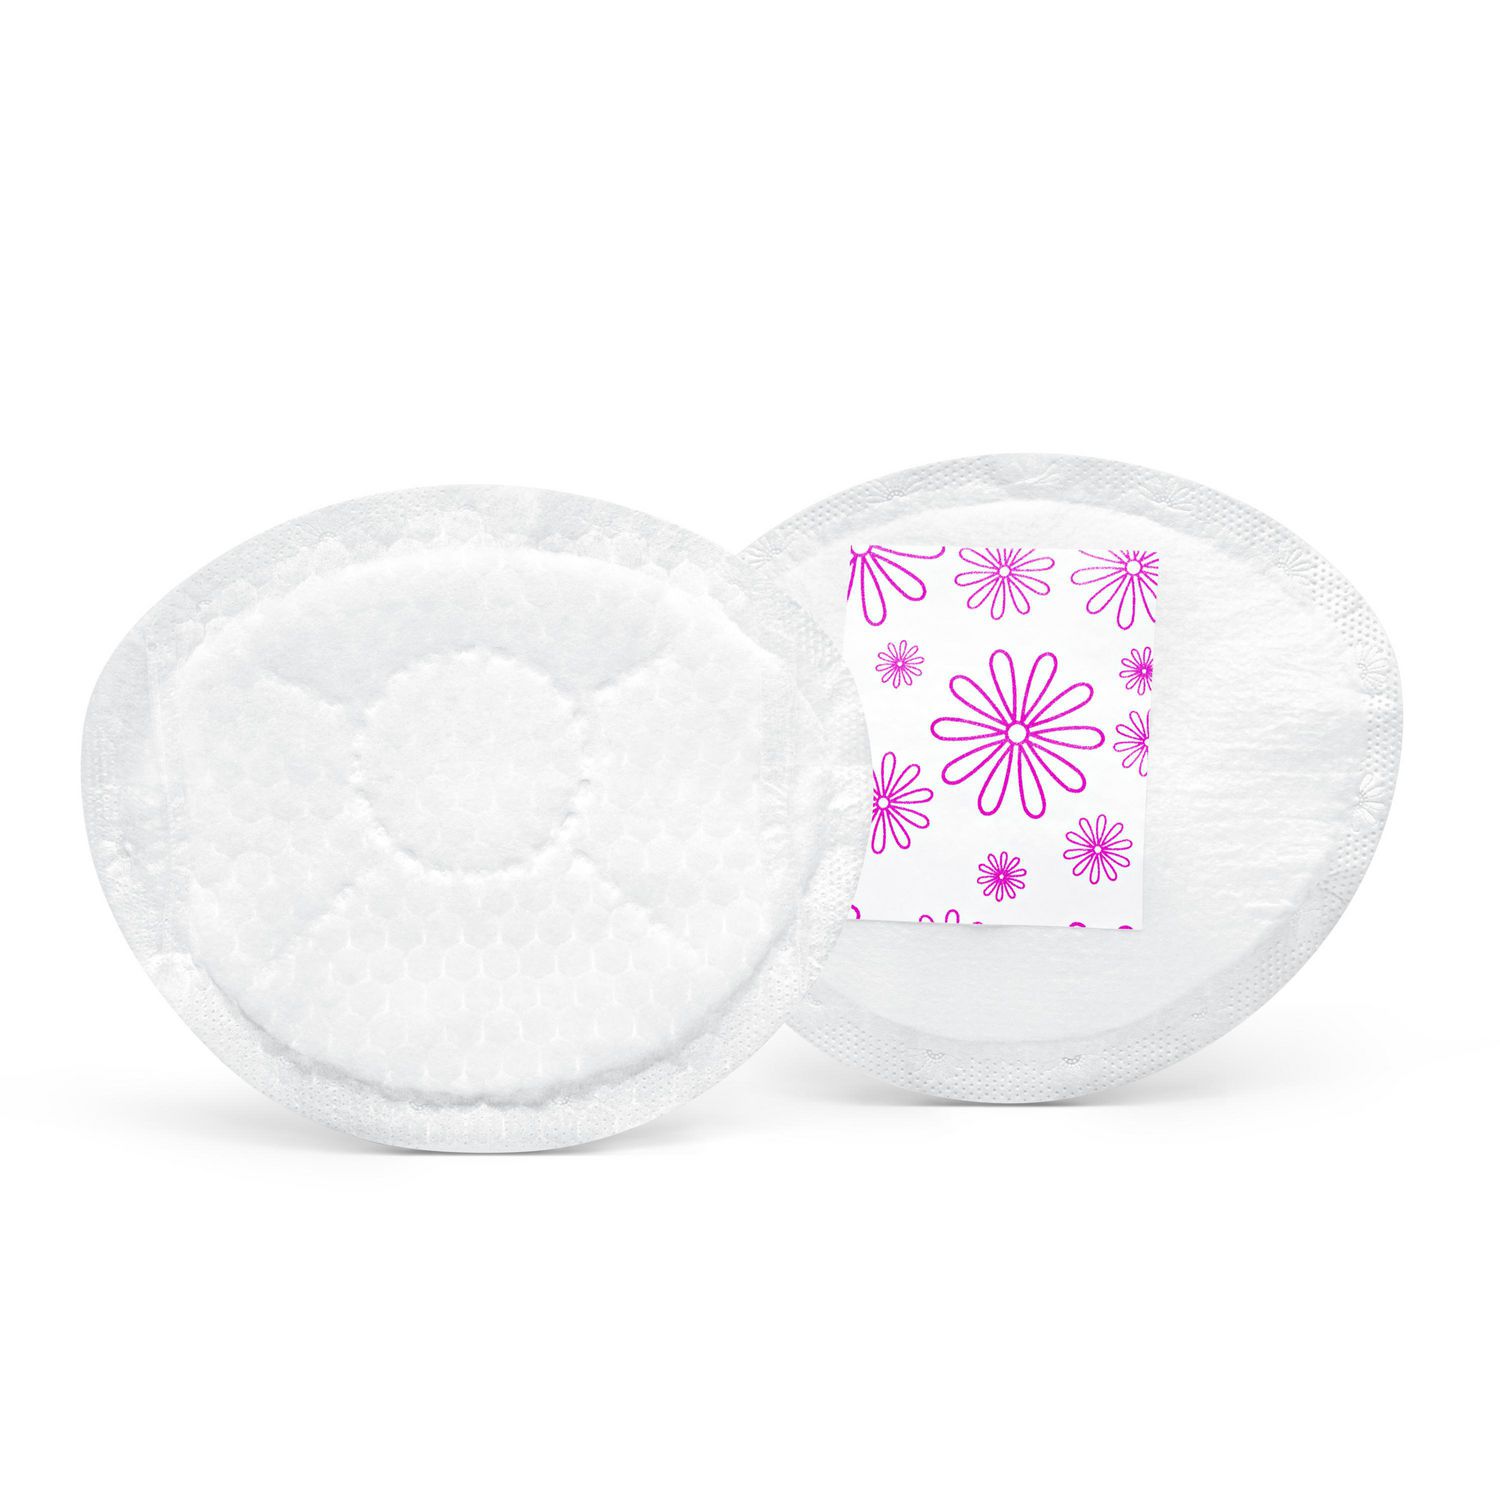 Nakson Nursing Pads - Ultra Soft and Absorbent for Breastfeeding Moms